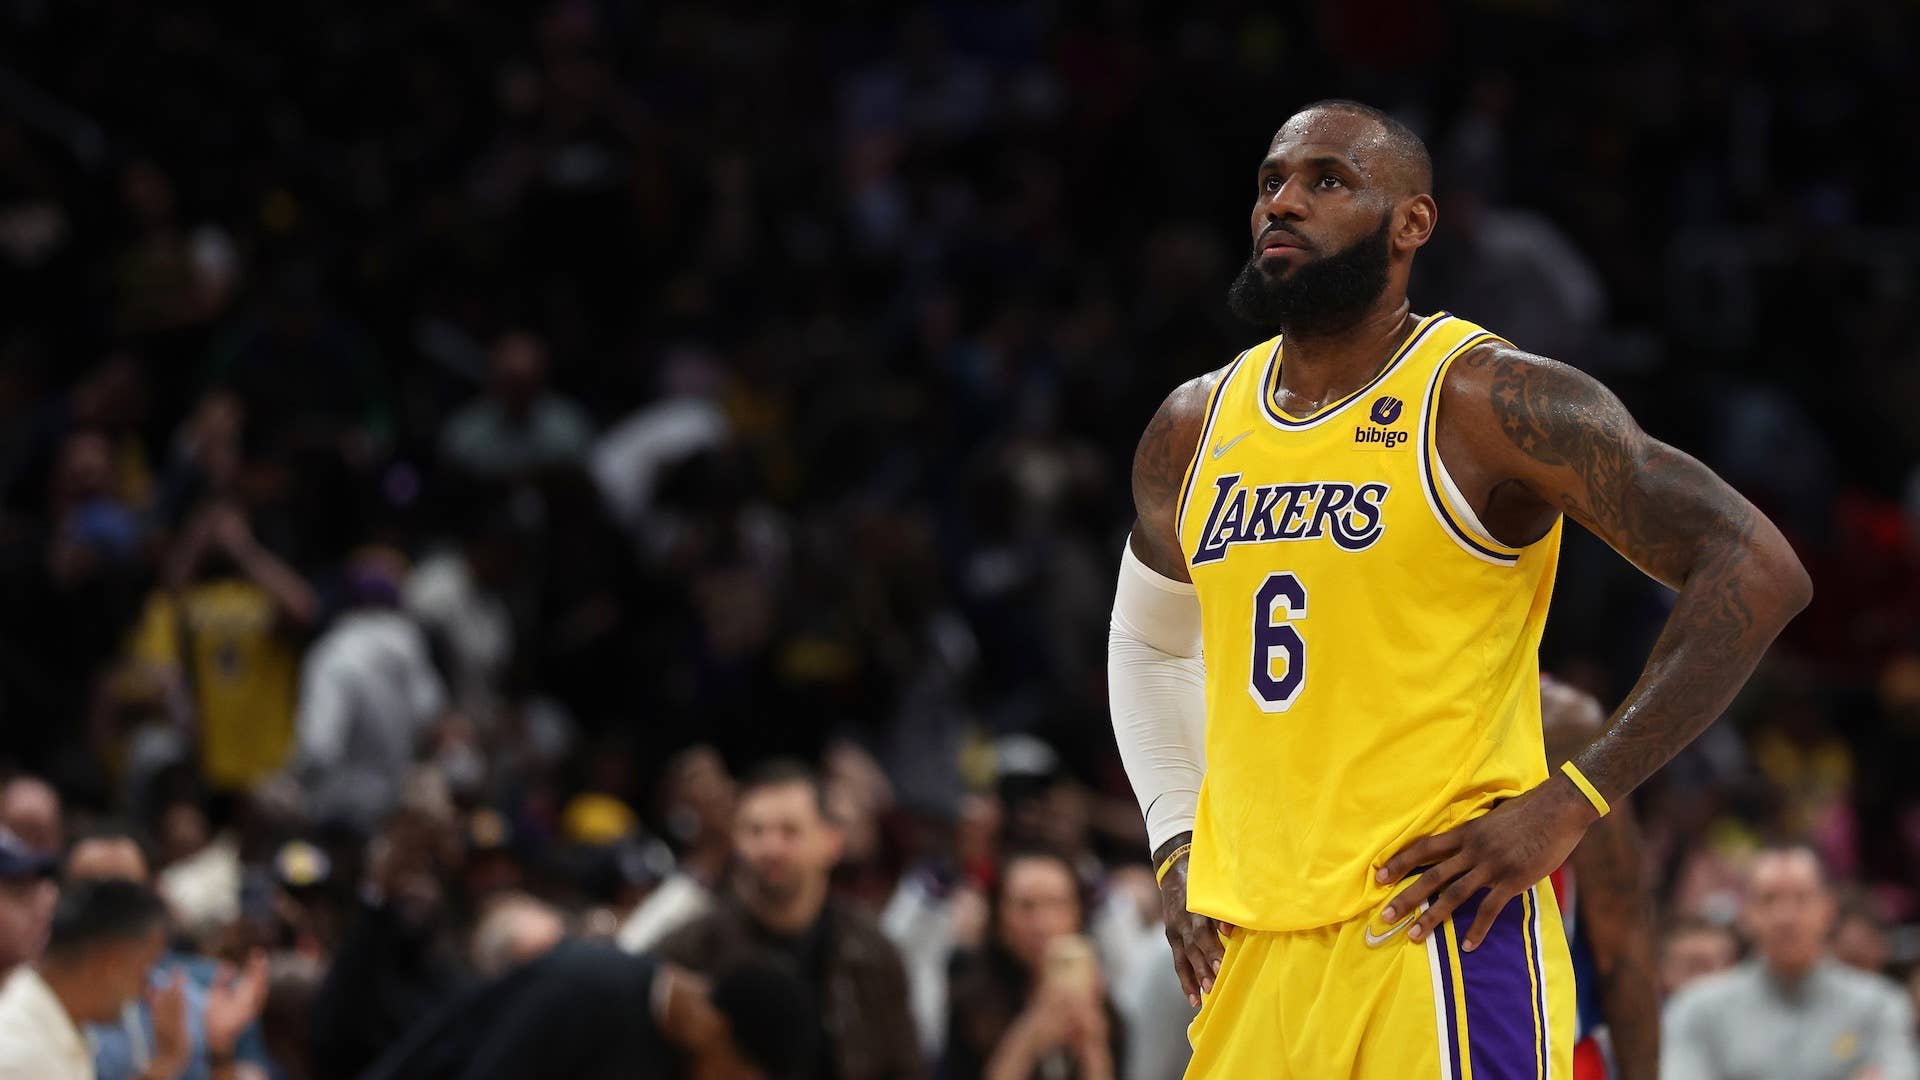 LeBron James #6 of the Los Angeles Lakers looks on after scoring against the Washington Wizards